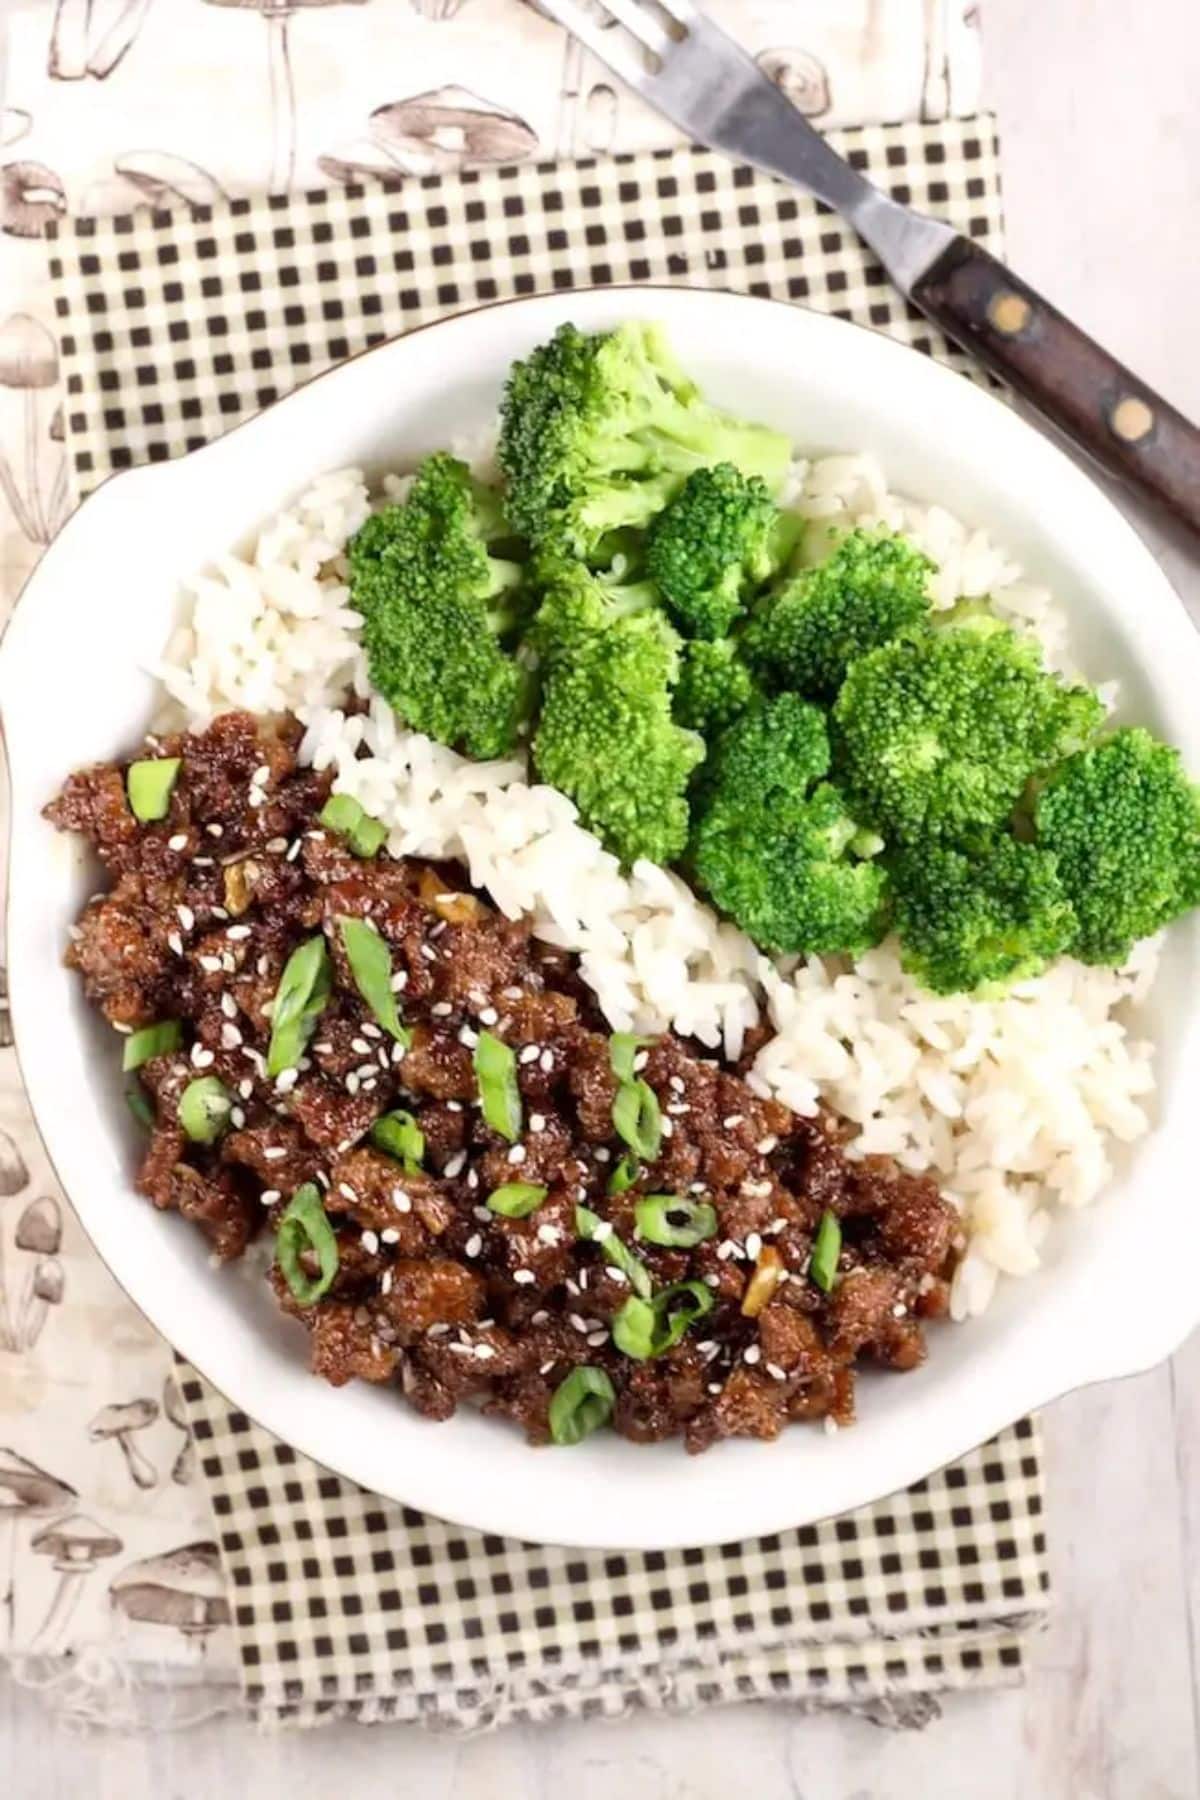 Tasty Korean Ground Beef and Broccoli with rice on a white plate.